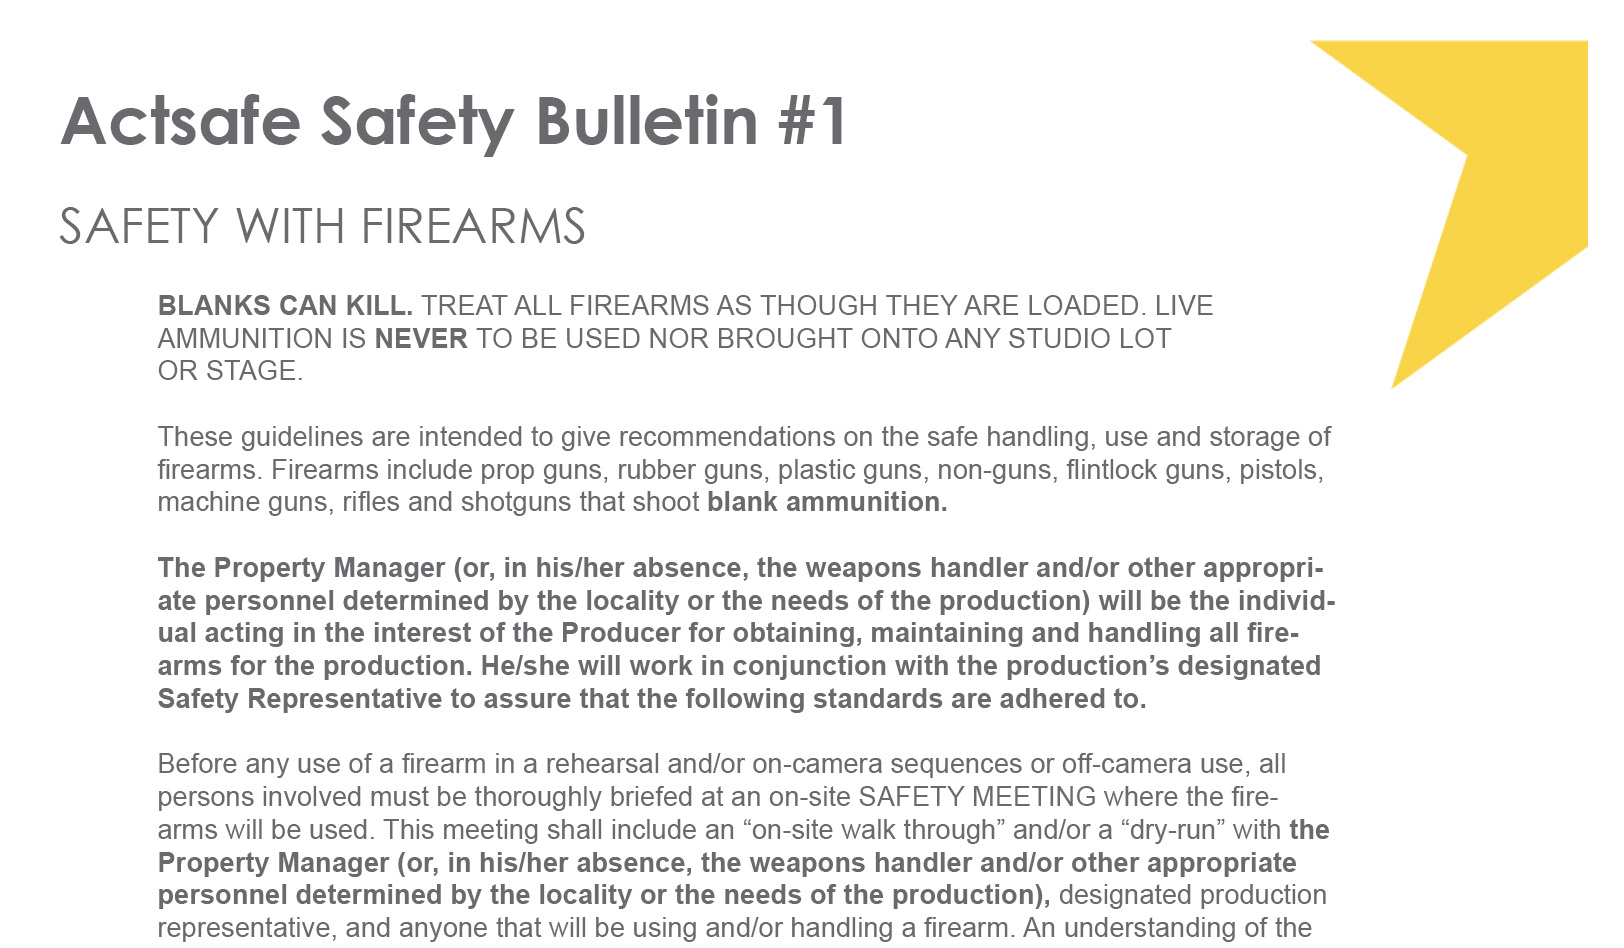 Safety-with-firearms-motion-picture-bulletin